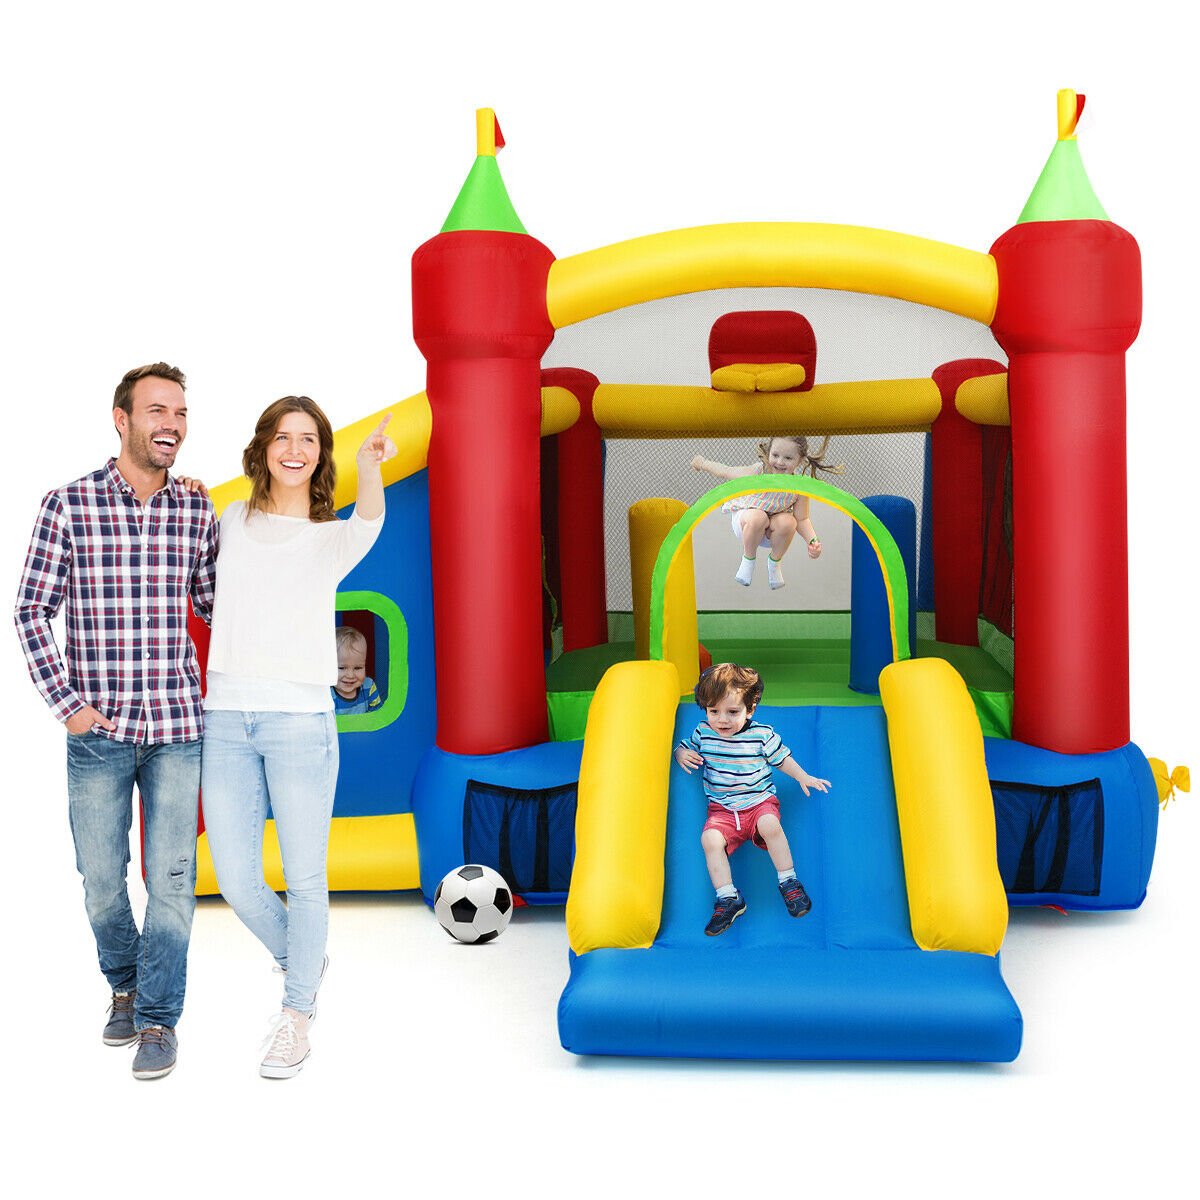 Inflatable Adventure Playland - Kids 7-in-1 Bounce House & Ocean Balls